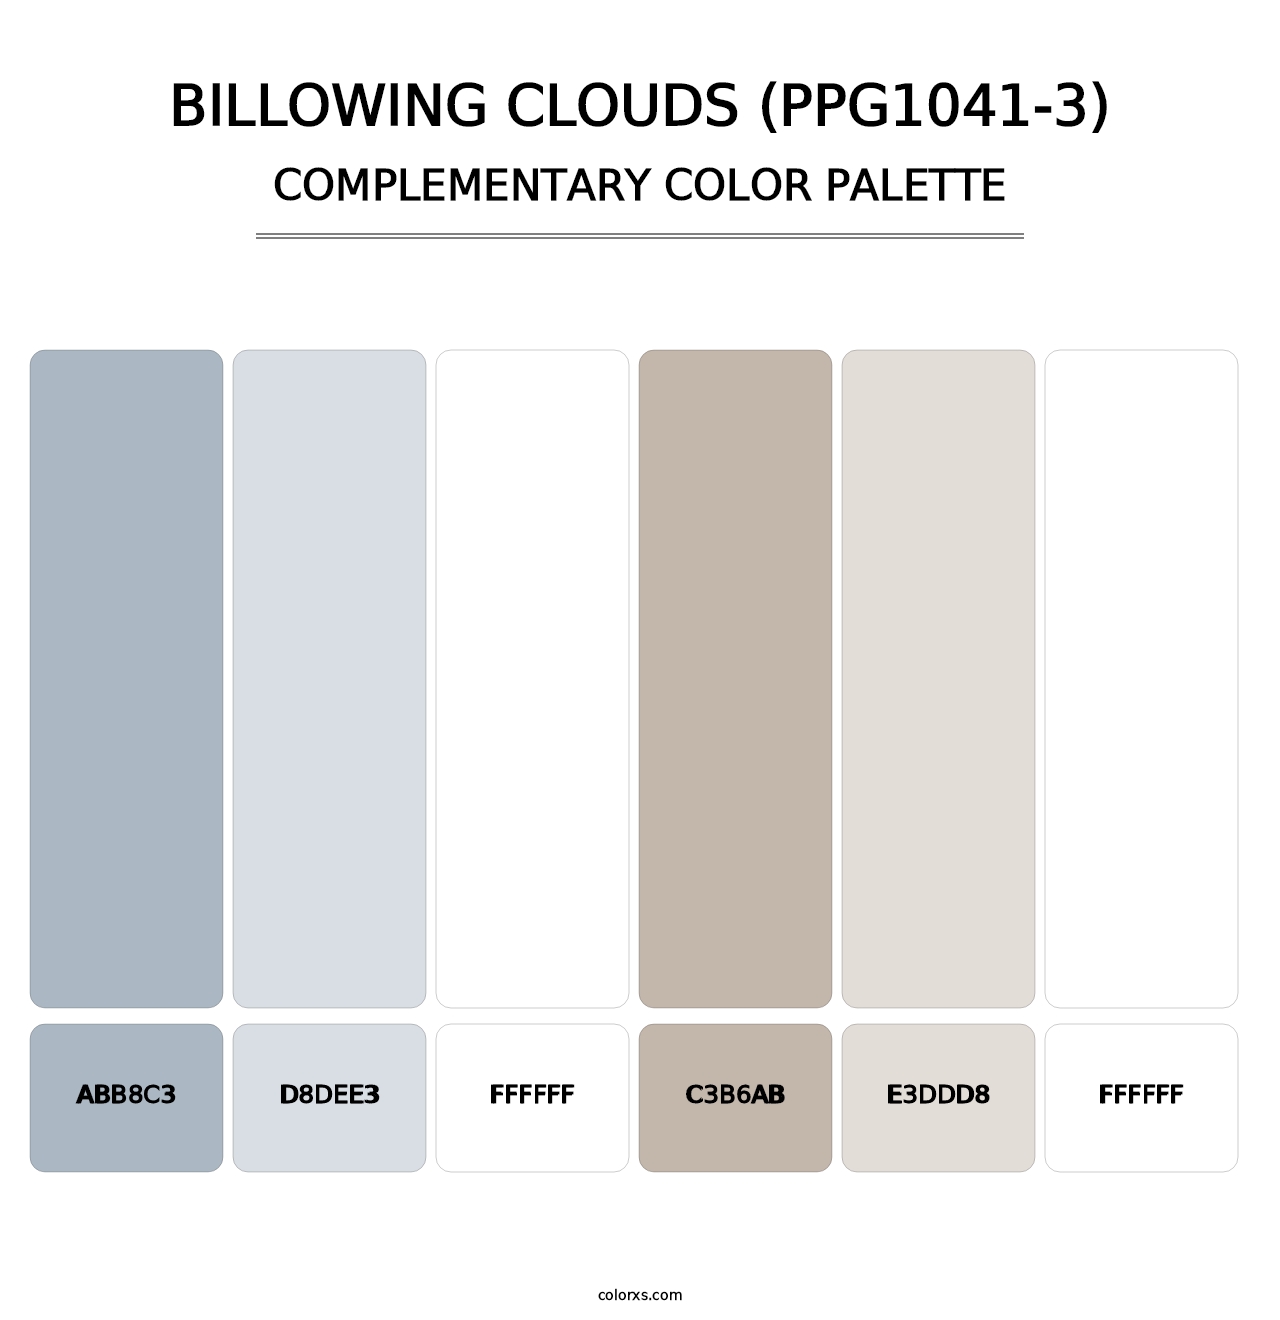 Billowing Clouds (PPG1041-3) - Complementary Color Palette